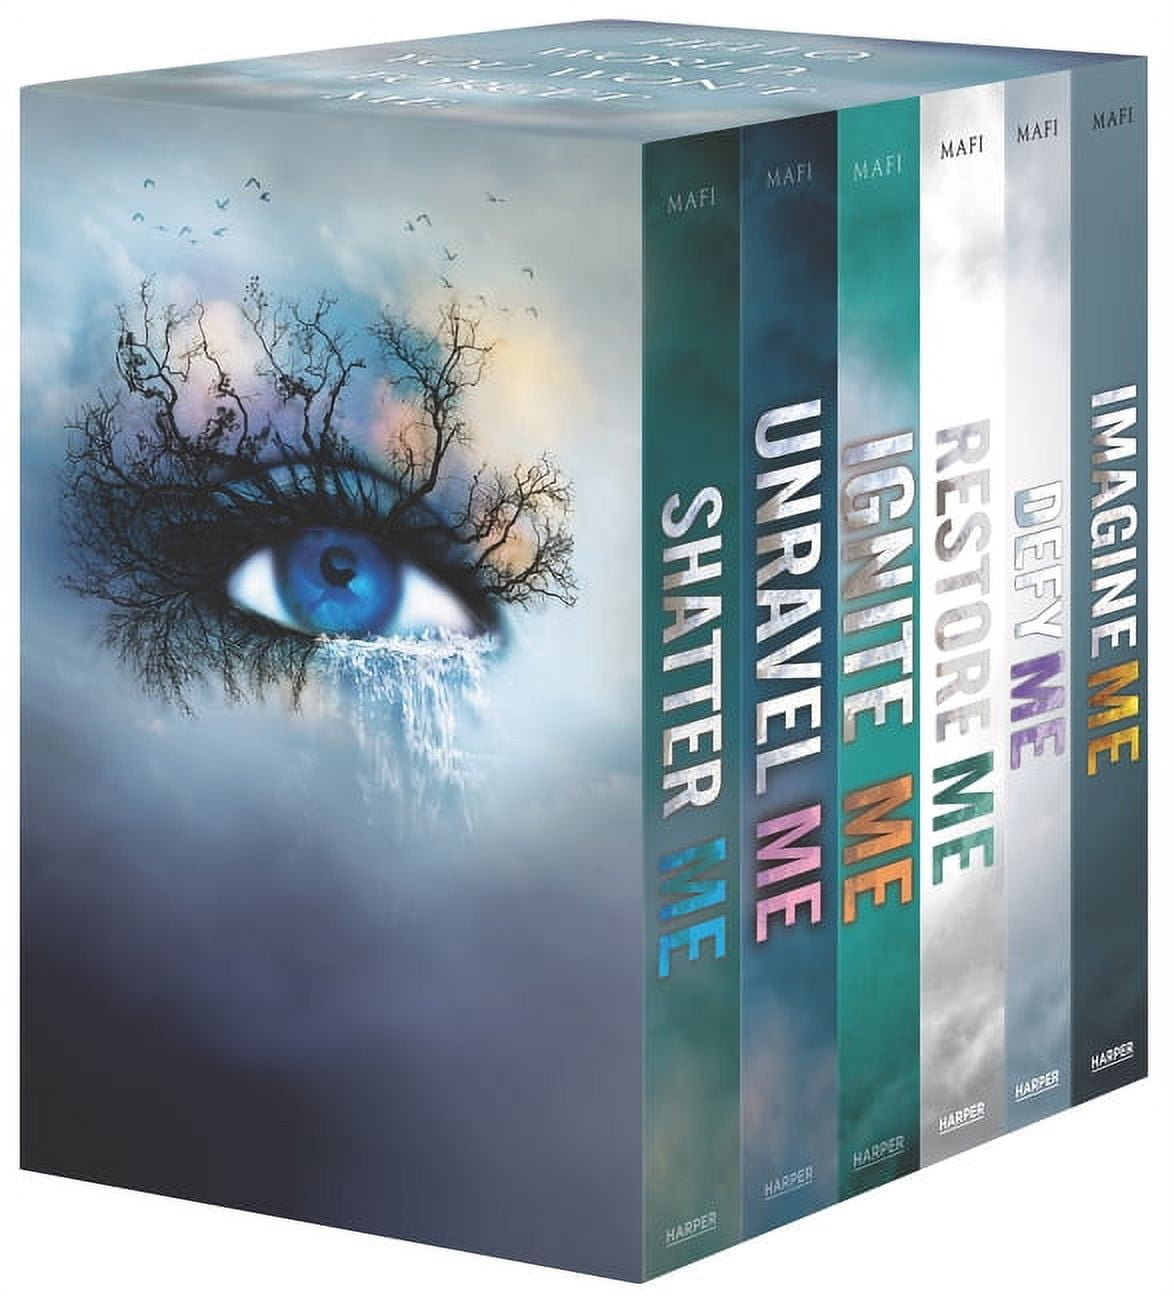 Shatter Me by Tahereh Mafi (10-Feb-2012) Paperback: : Books